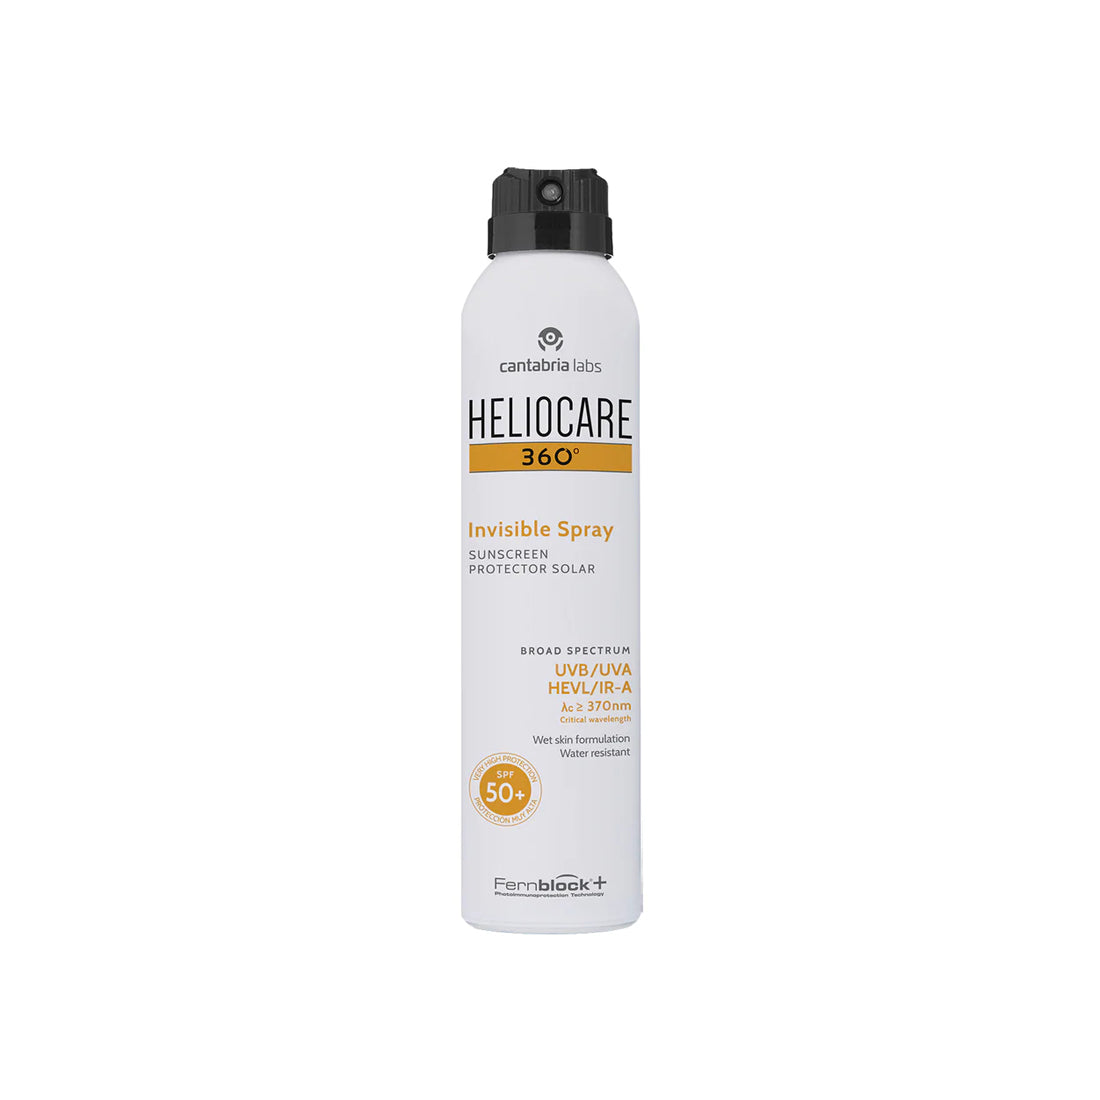 Heliocare 360° Protector Solar FPS 50+ Spray Invisible